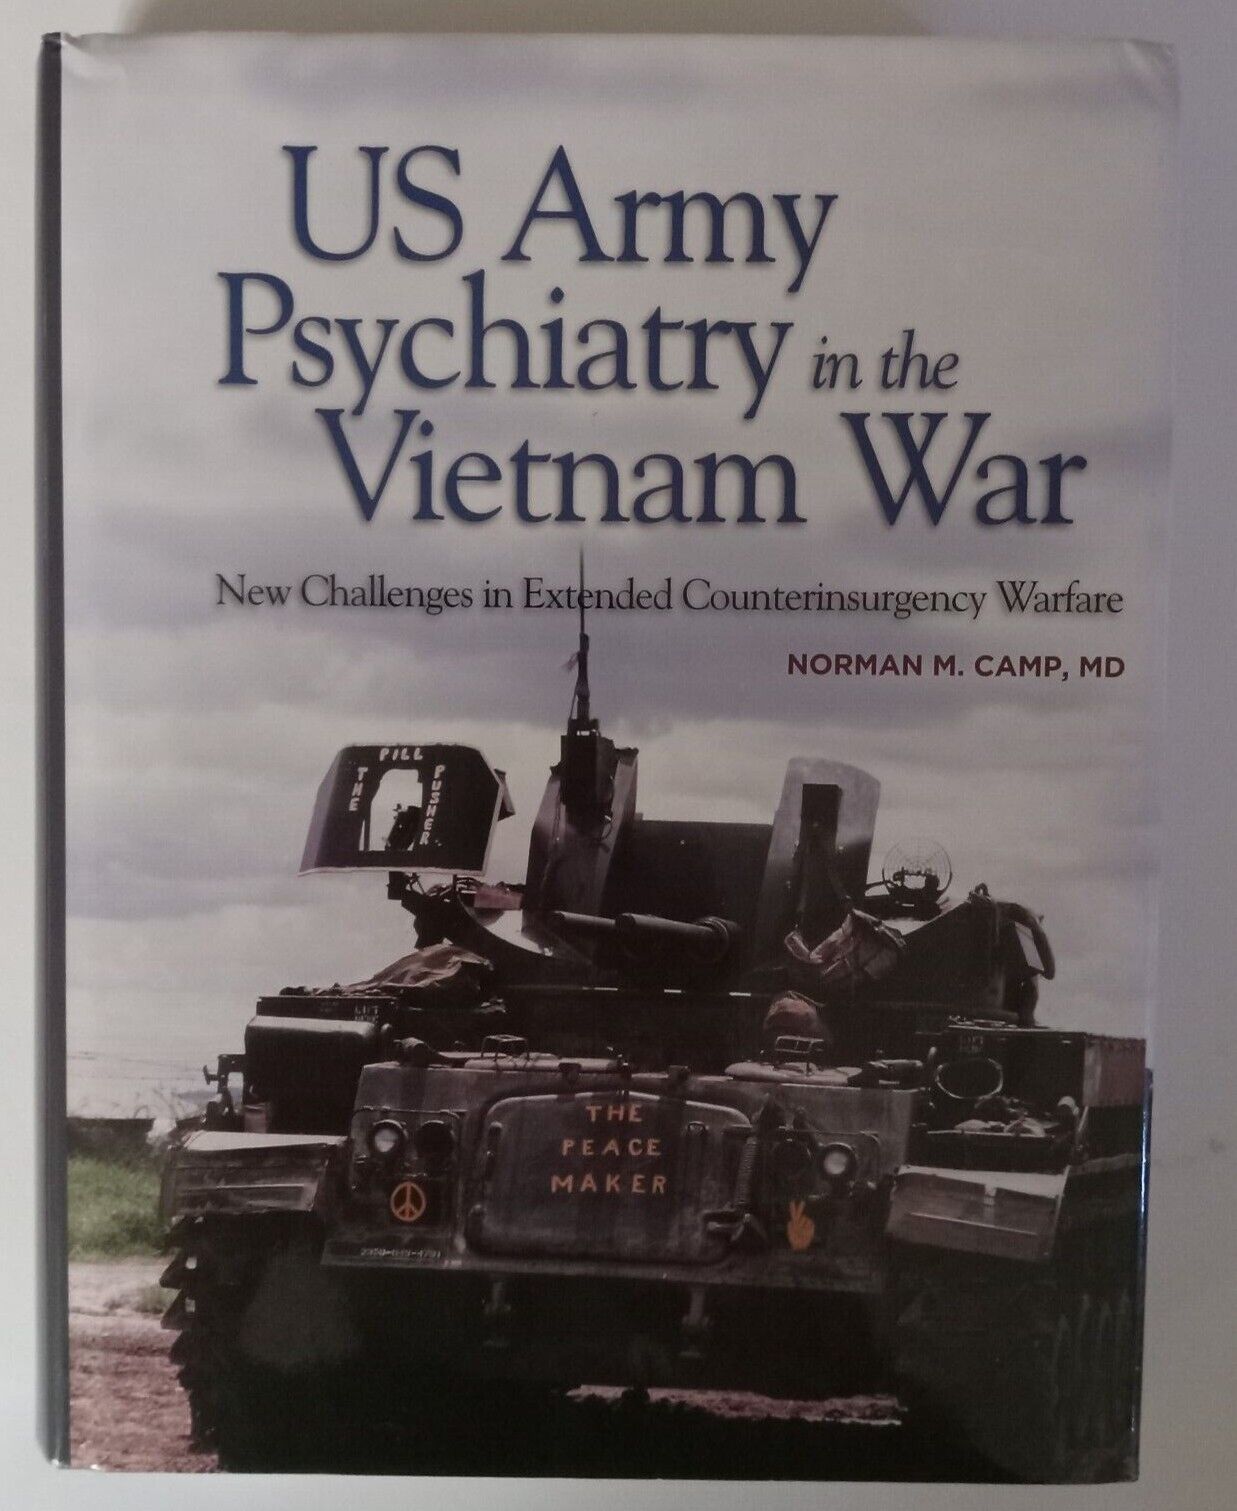 US Army Psychiatry in the Vietnam War, Norman M. Camp, MD (2015)